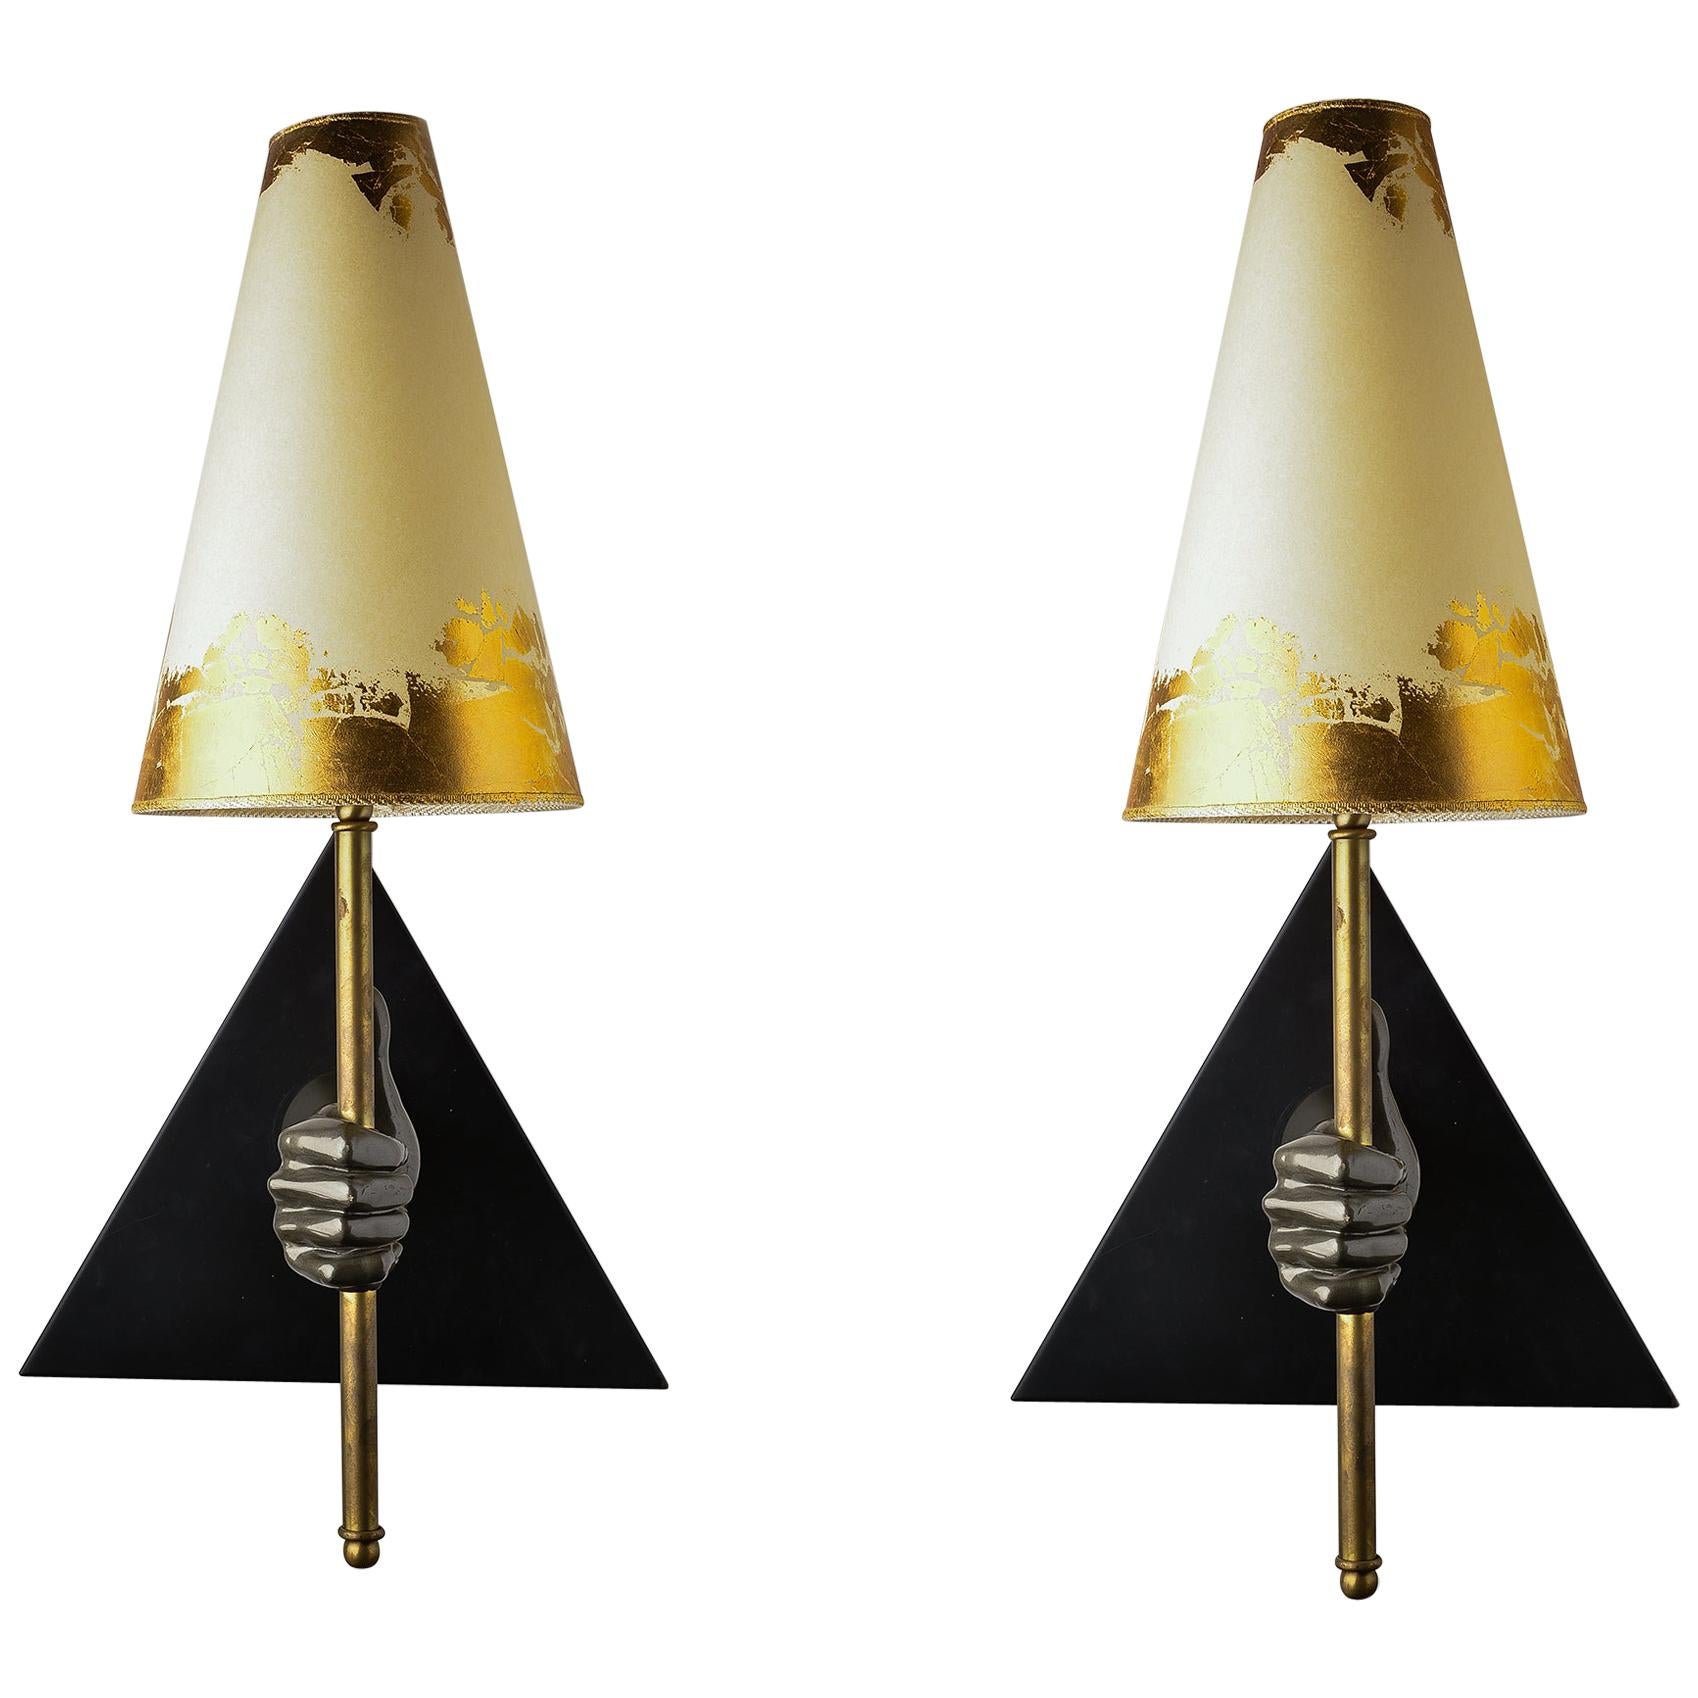 Pair of Vintage Wall Lamps in the Manner of Arbus